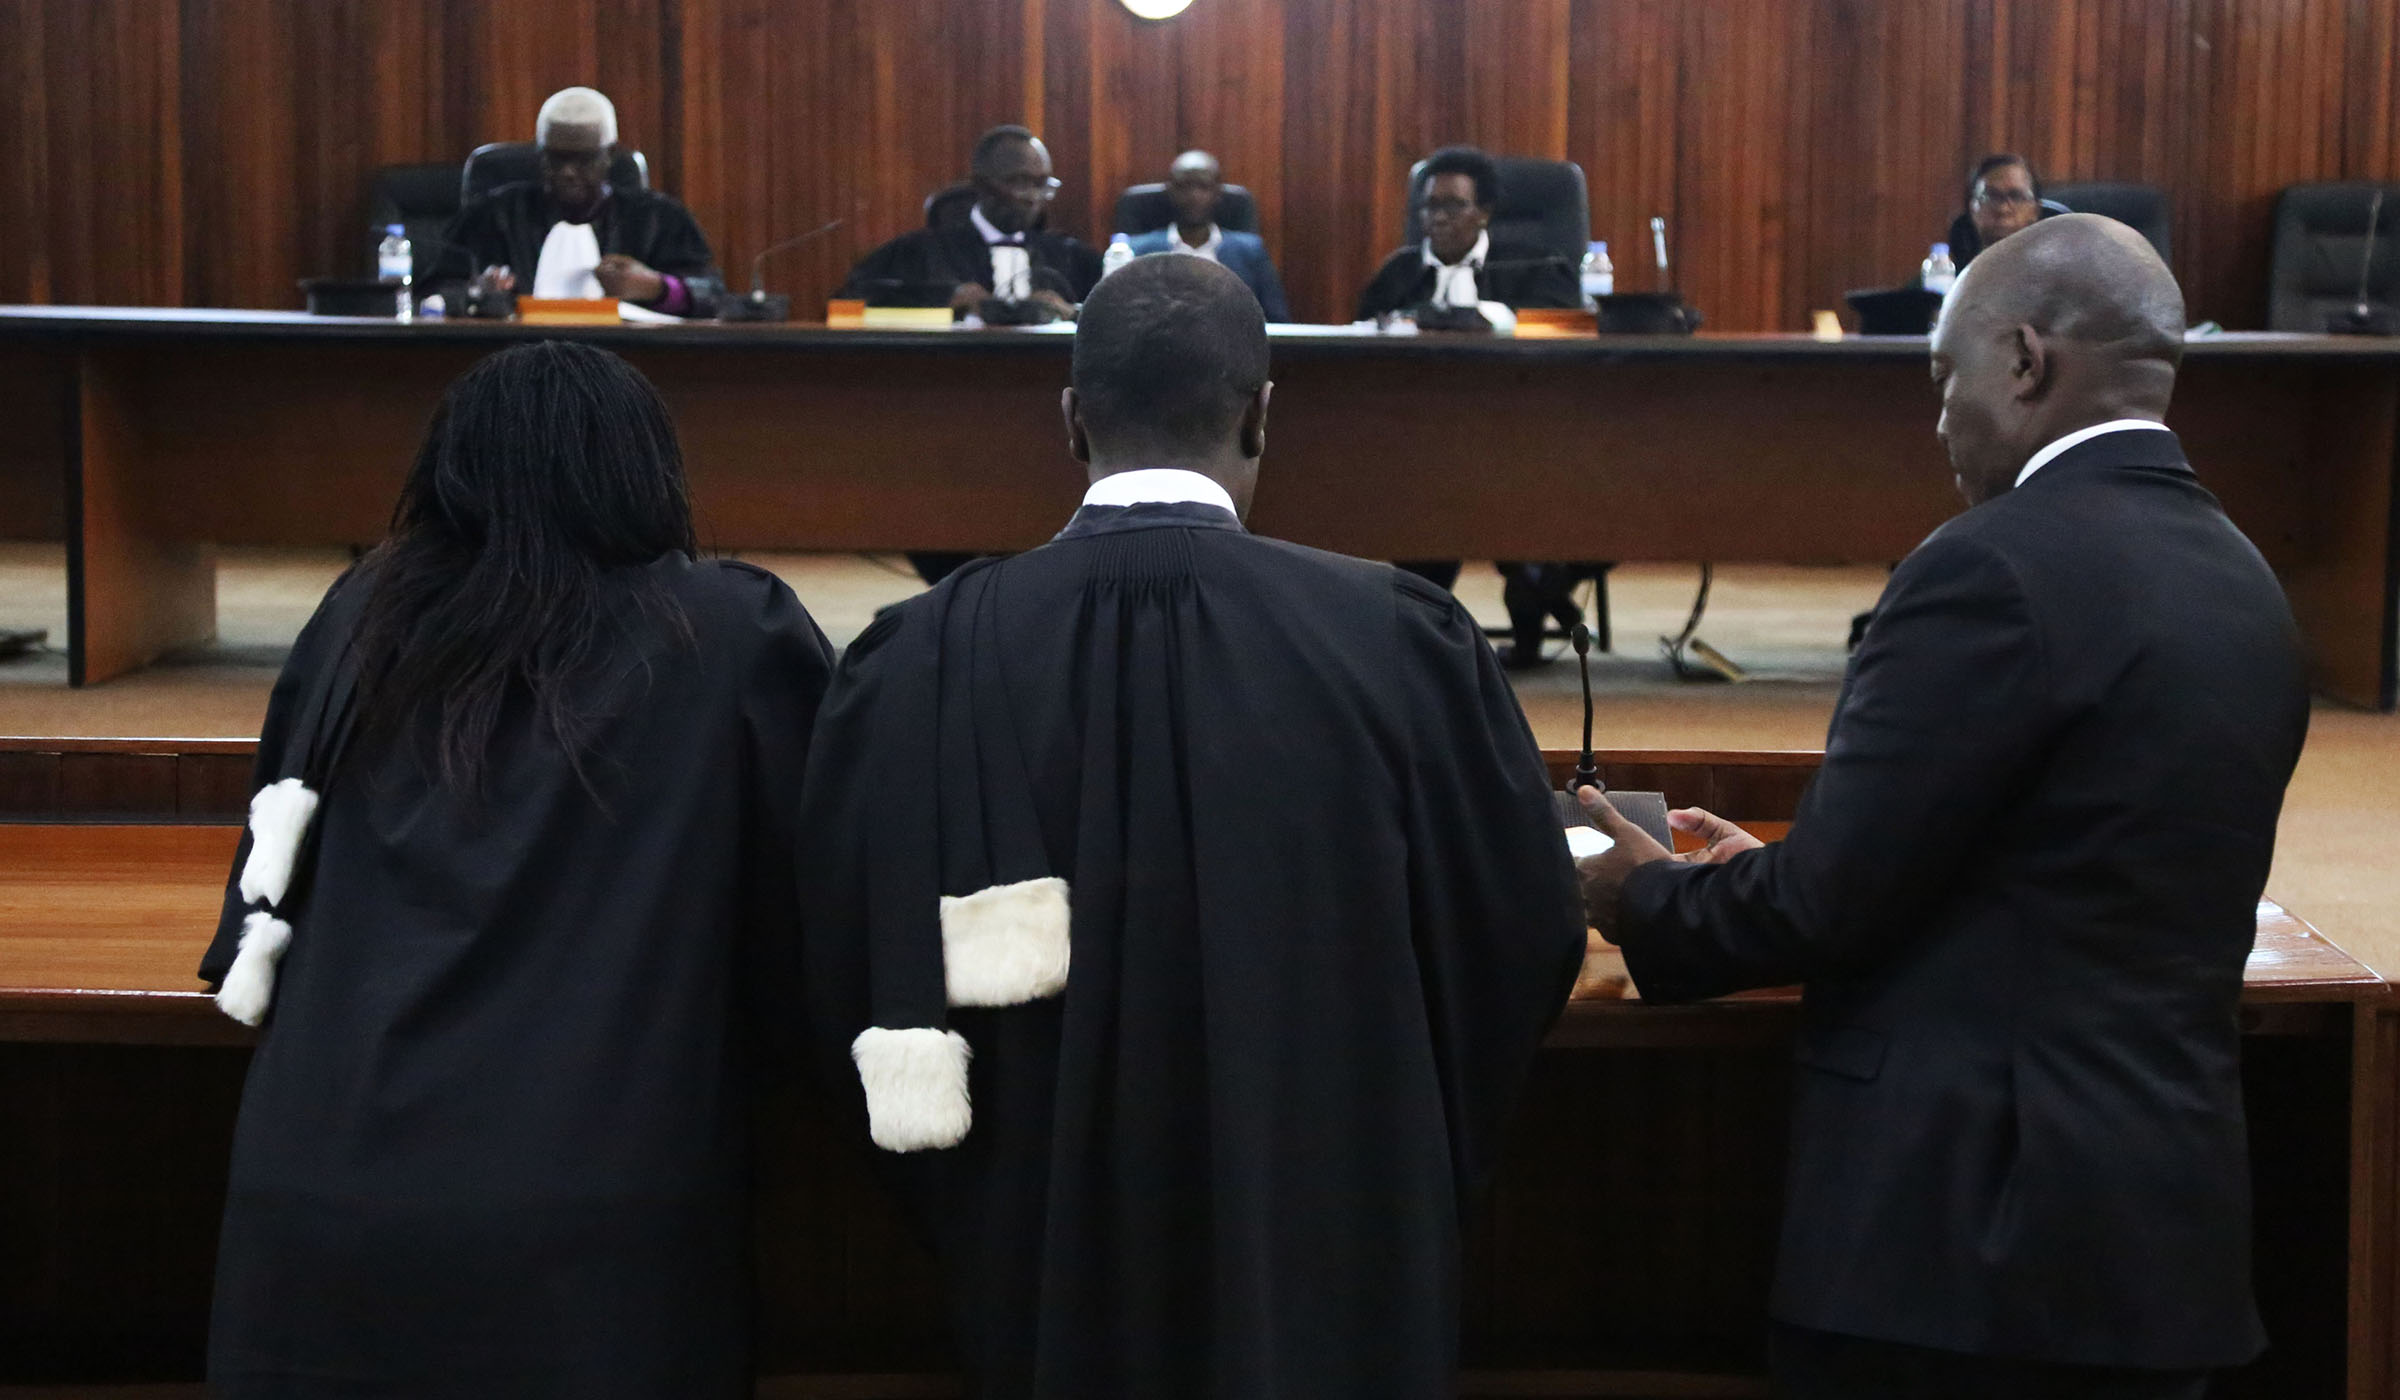 Richard Mugisha (right) with his lawyers Moise Nkundabarashi and Florida Kabasinga (left) sign a copy of the ruling at the Supreme Court in front of the justices on Wednesday. Sam Ngendahimana.